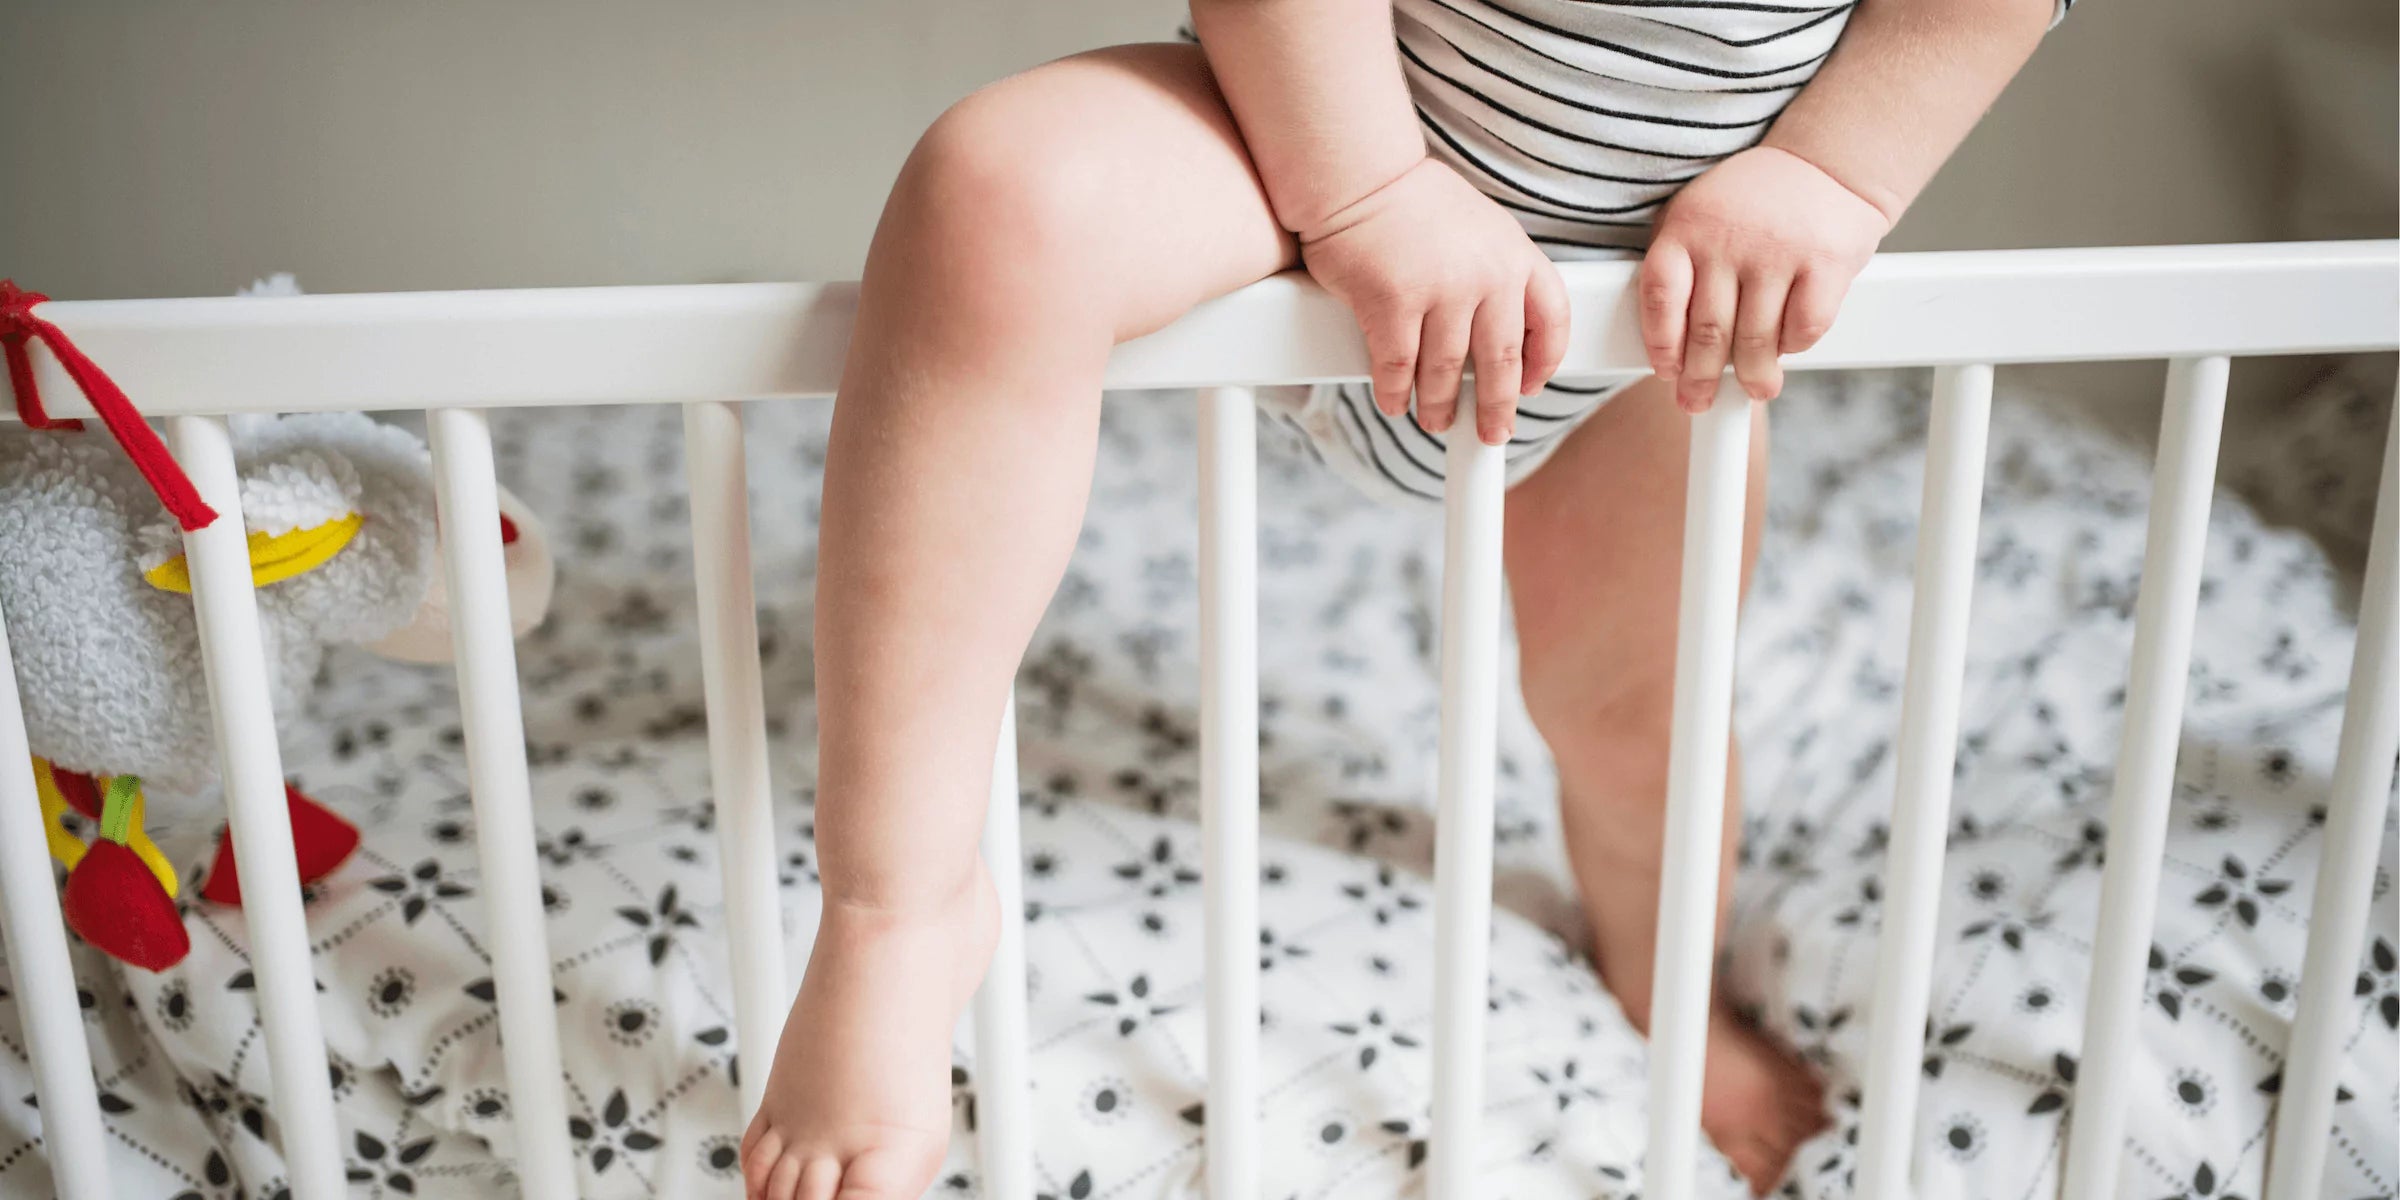 What to do When Your Toddler Climbs Out of the Crib